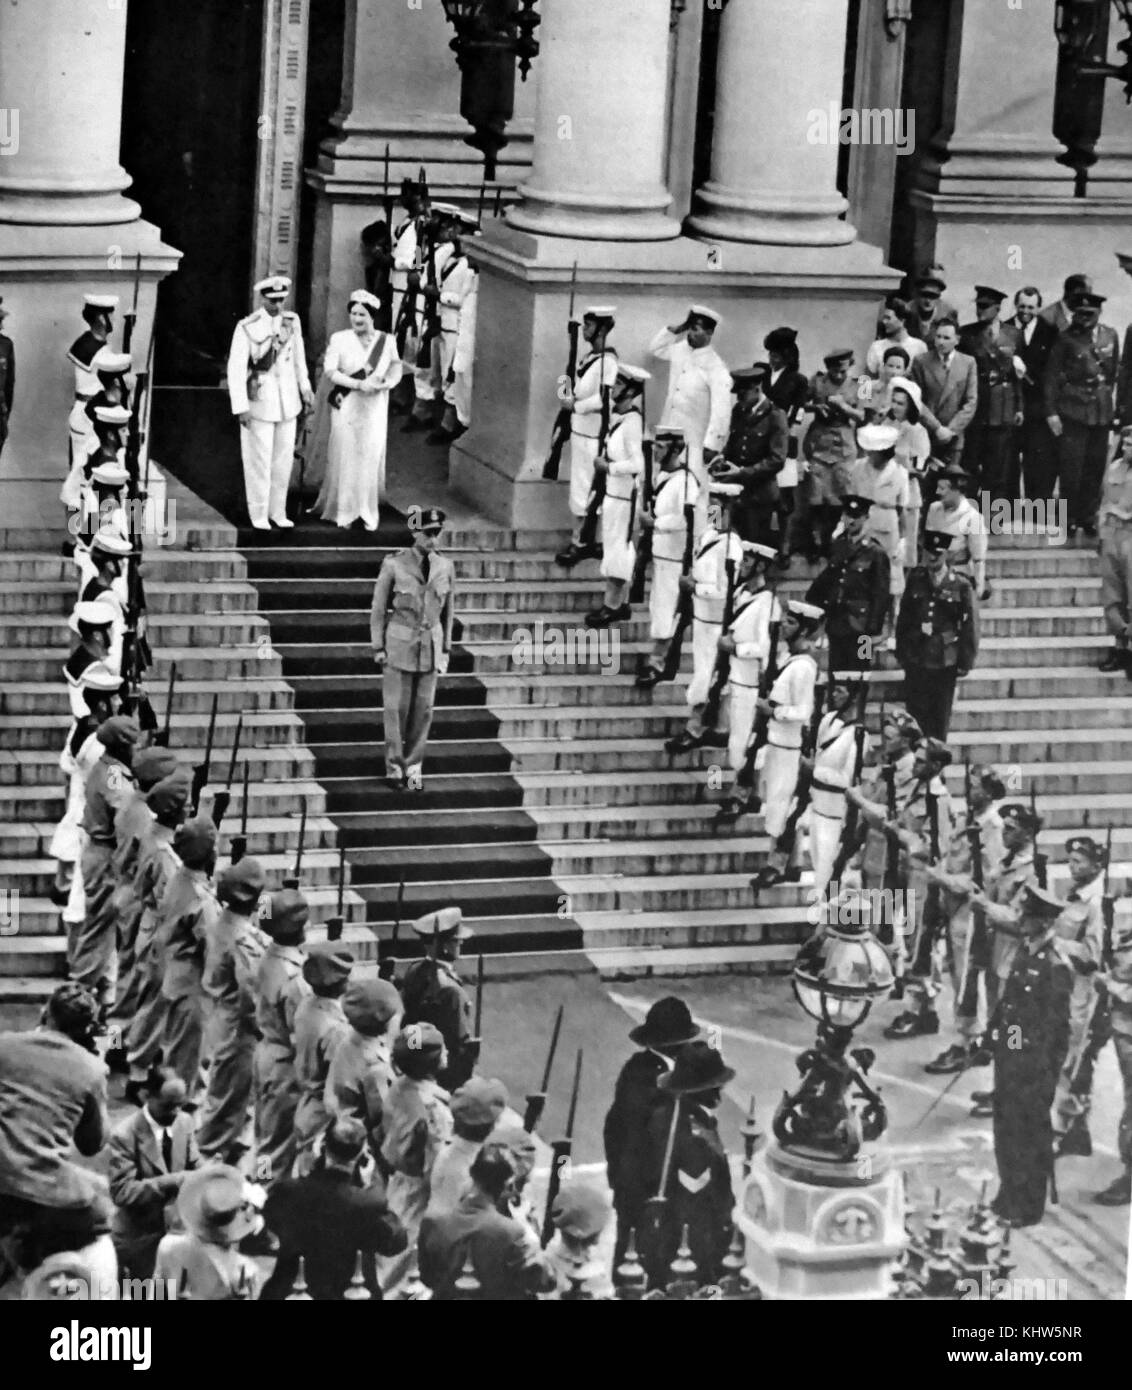 Photograph of King George VI and Queen Elizabeth Queen Mother leaving the Parliament House in South Africa after opening the session, speaking in both English and Afrikaans. George VI (1895-1952) King of the United Kingdom and the Dominions of the British Commonwealth, the last Emperor of India and the first Head of the Commonwealth. Queen Elizabeth The Queen Mother (1900-2002). Dated 20th Century Stock Photo